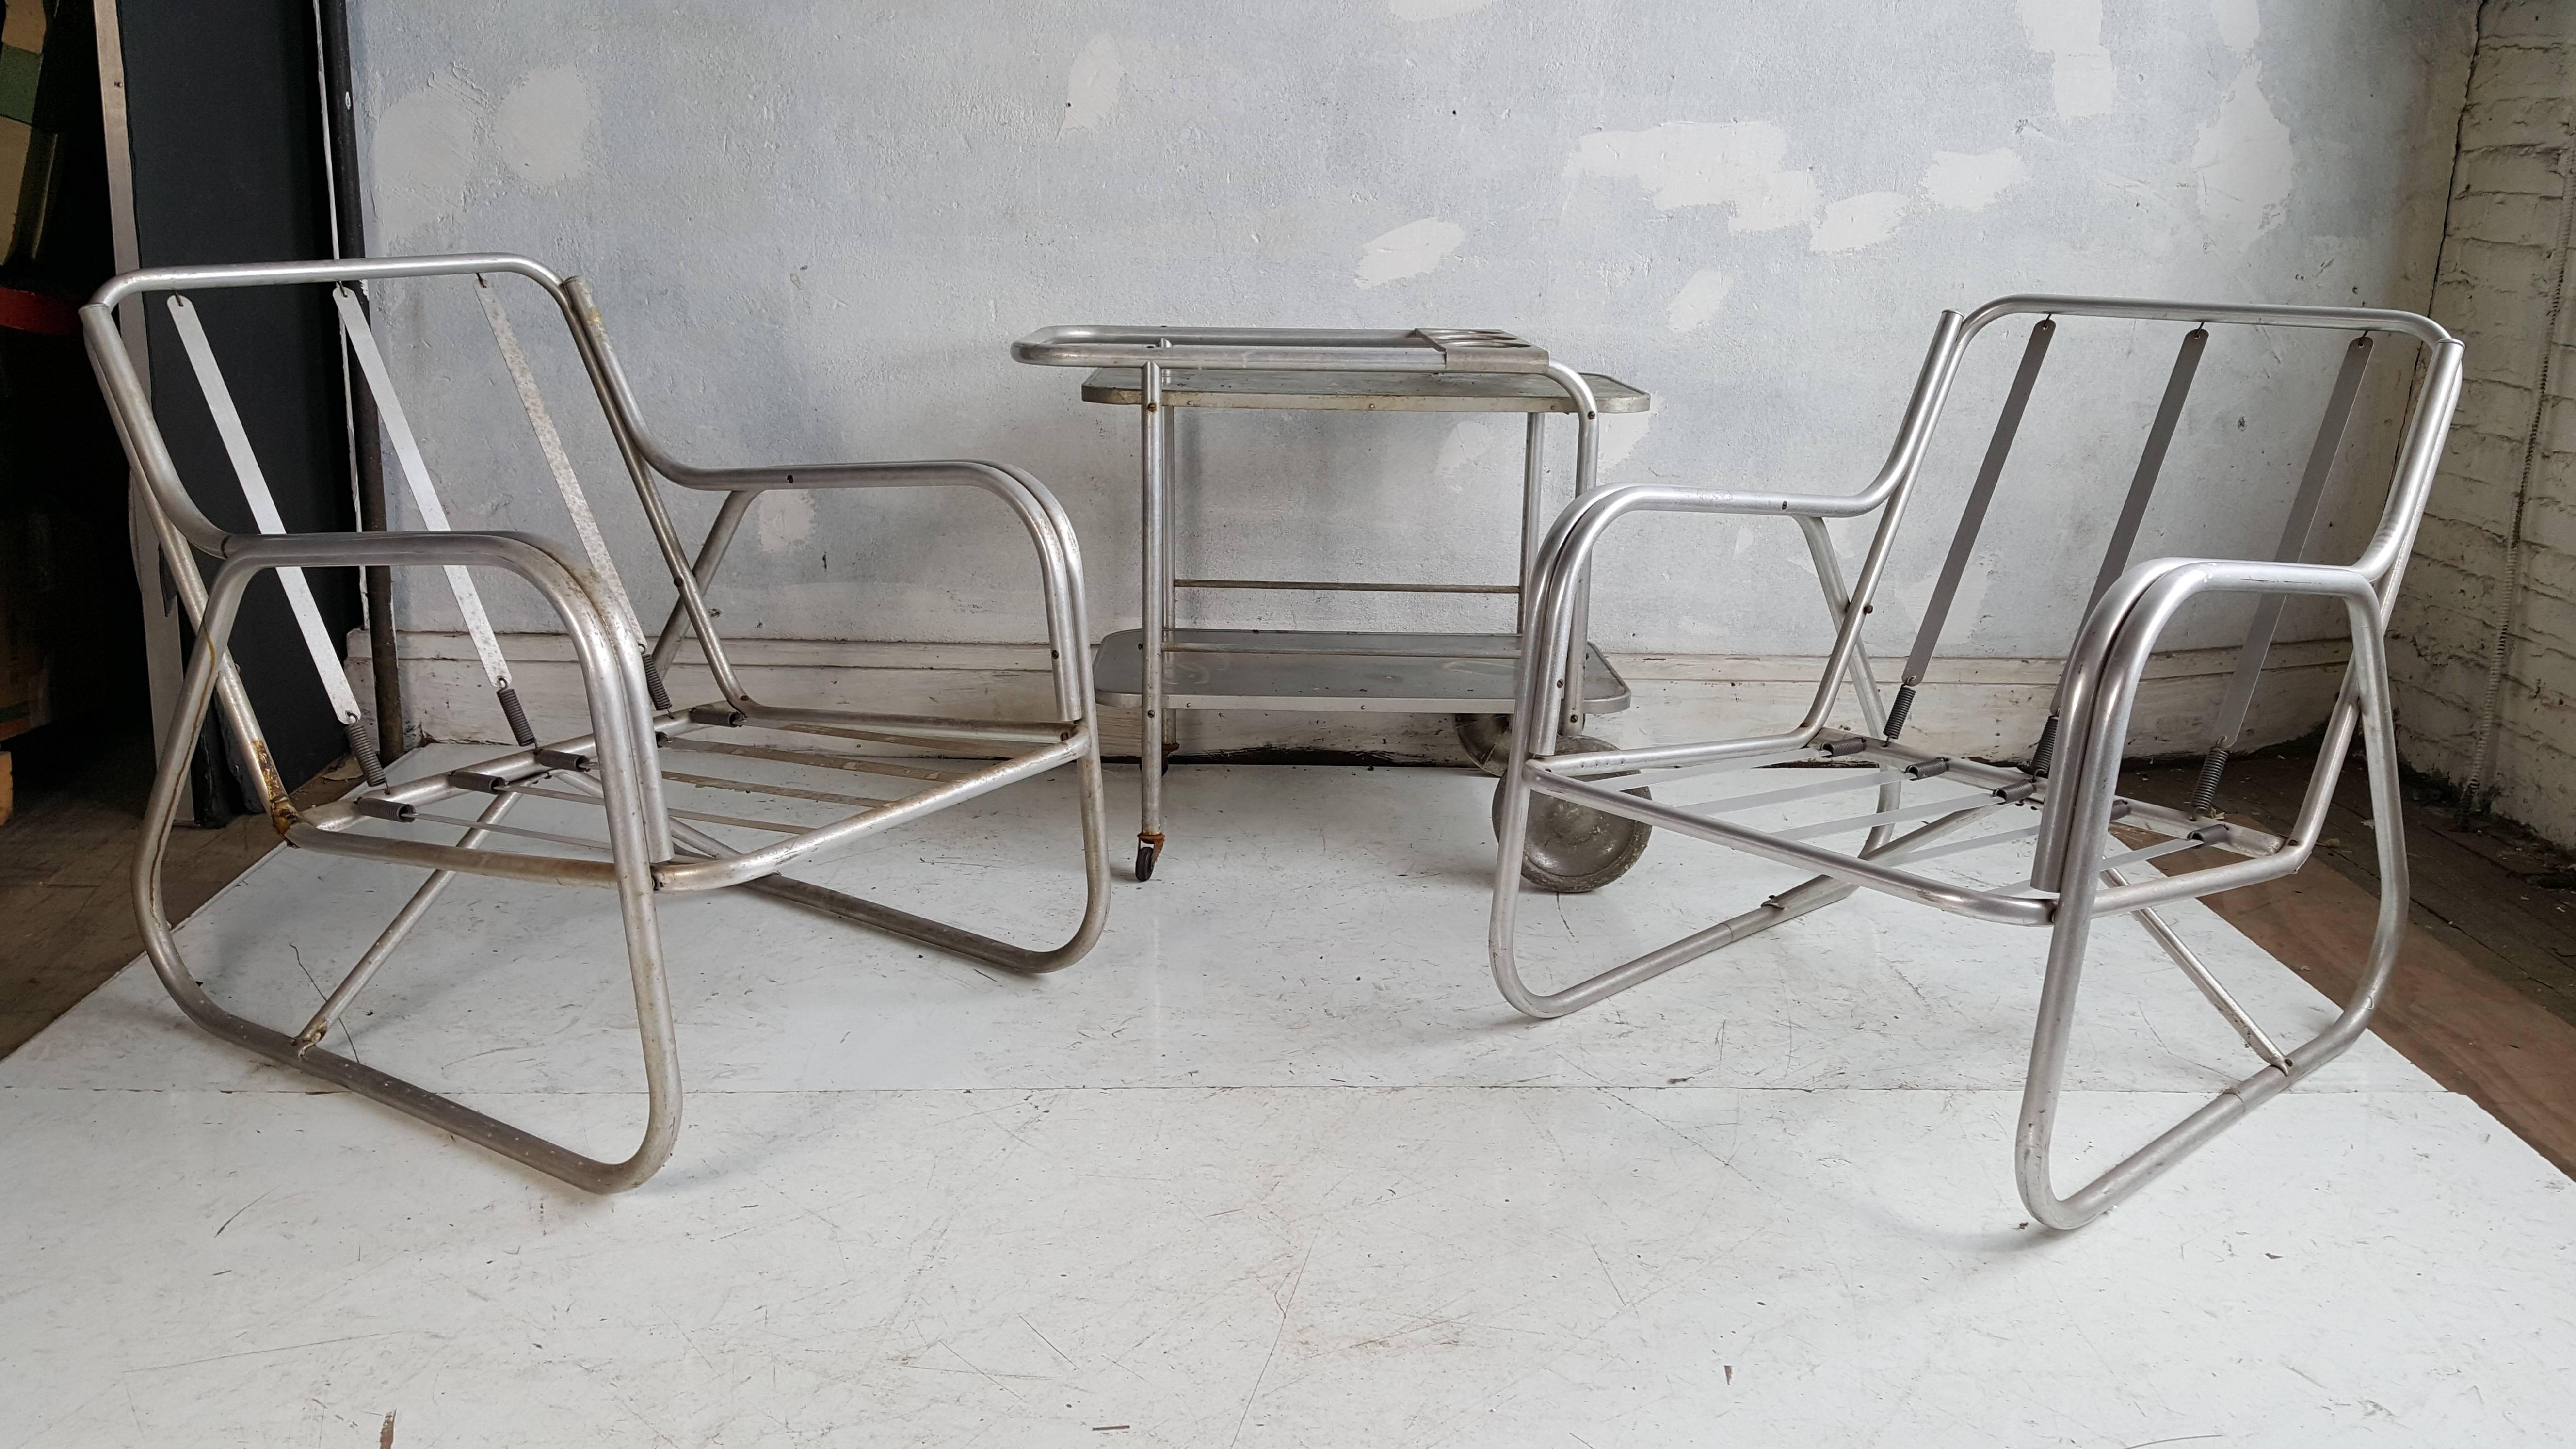 Classic Aluminum outdoor living,, Matching pair of lounge chairs and two-tier rolling bar cart, manufactured by Deeco,Craftsman in Aluminum ,California,Wonderful Art Deco ,Machine Age style.  Reminiscent of the classic sought after aluminum pieces